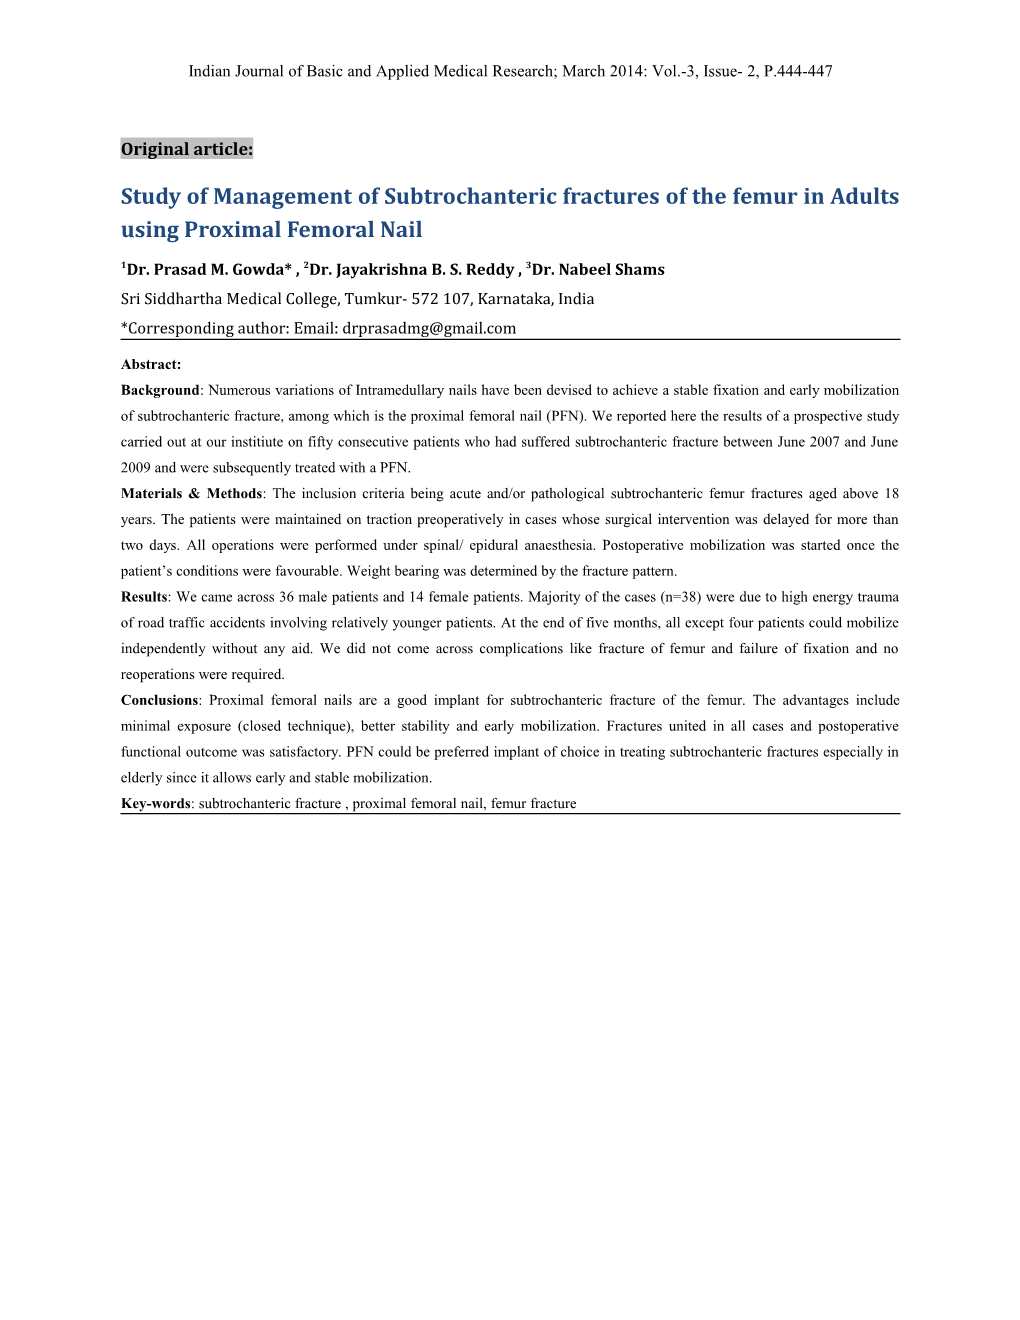 Study of Management of Subtrochanteric Fractures of the Femur in Adults Using Proximal